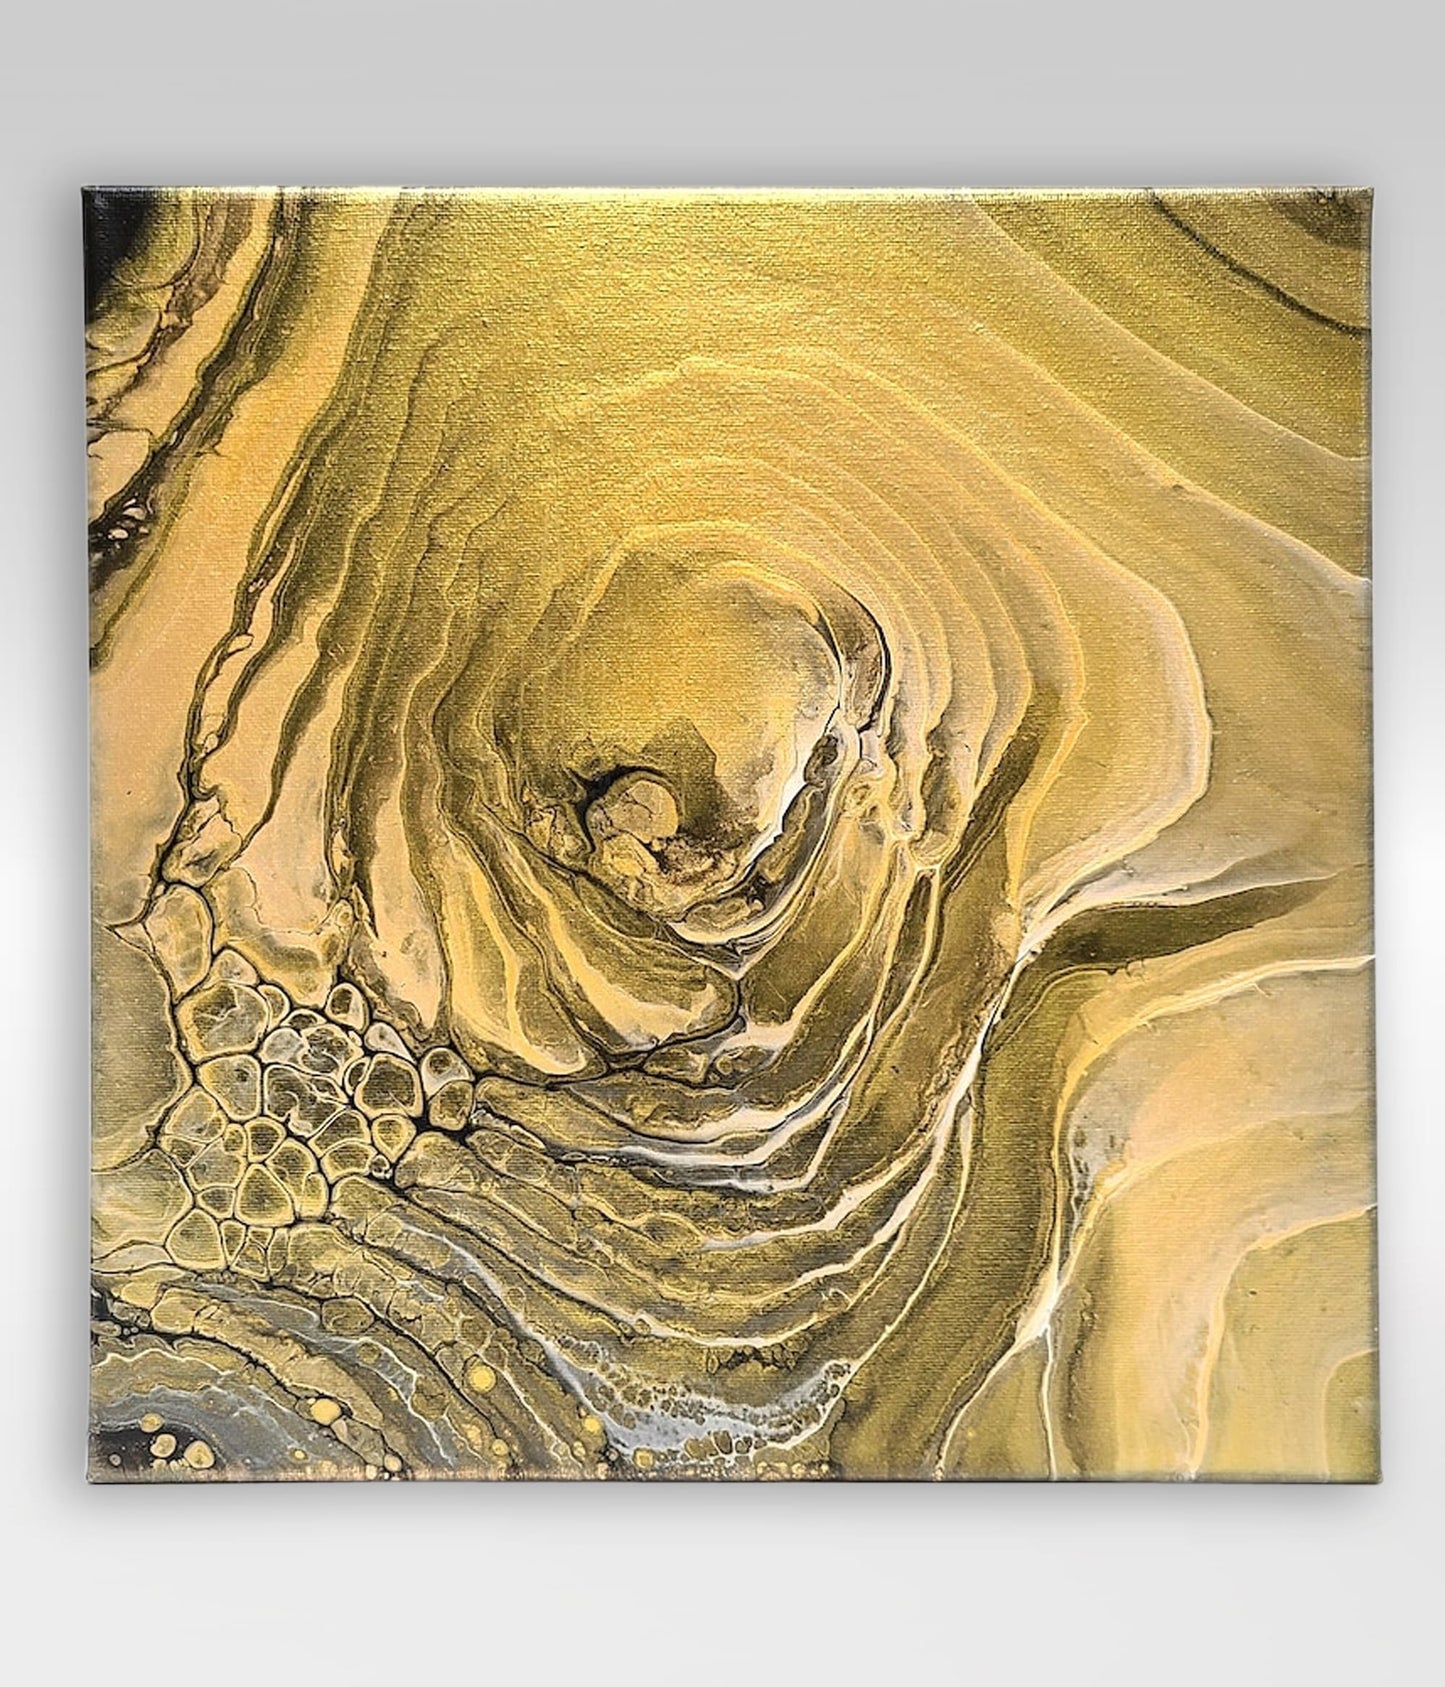 Golden Opportunity – 12 x 12 Acrylic Pour Painting On Canvas